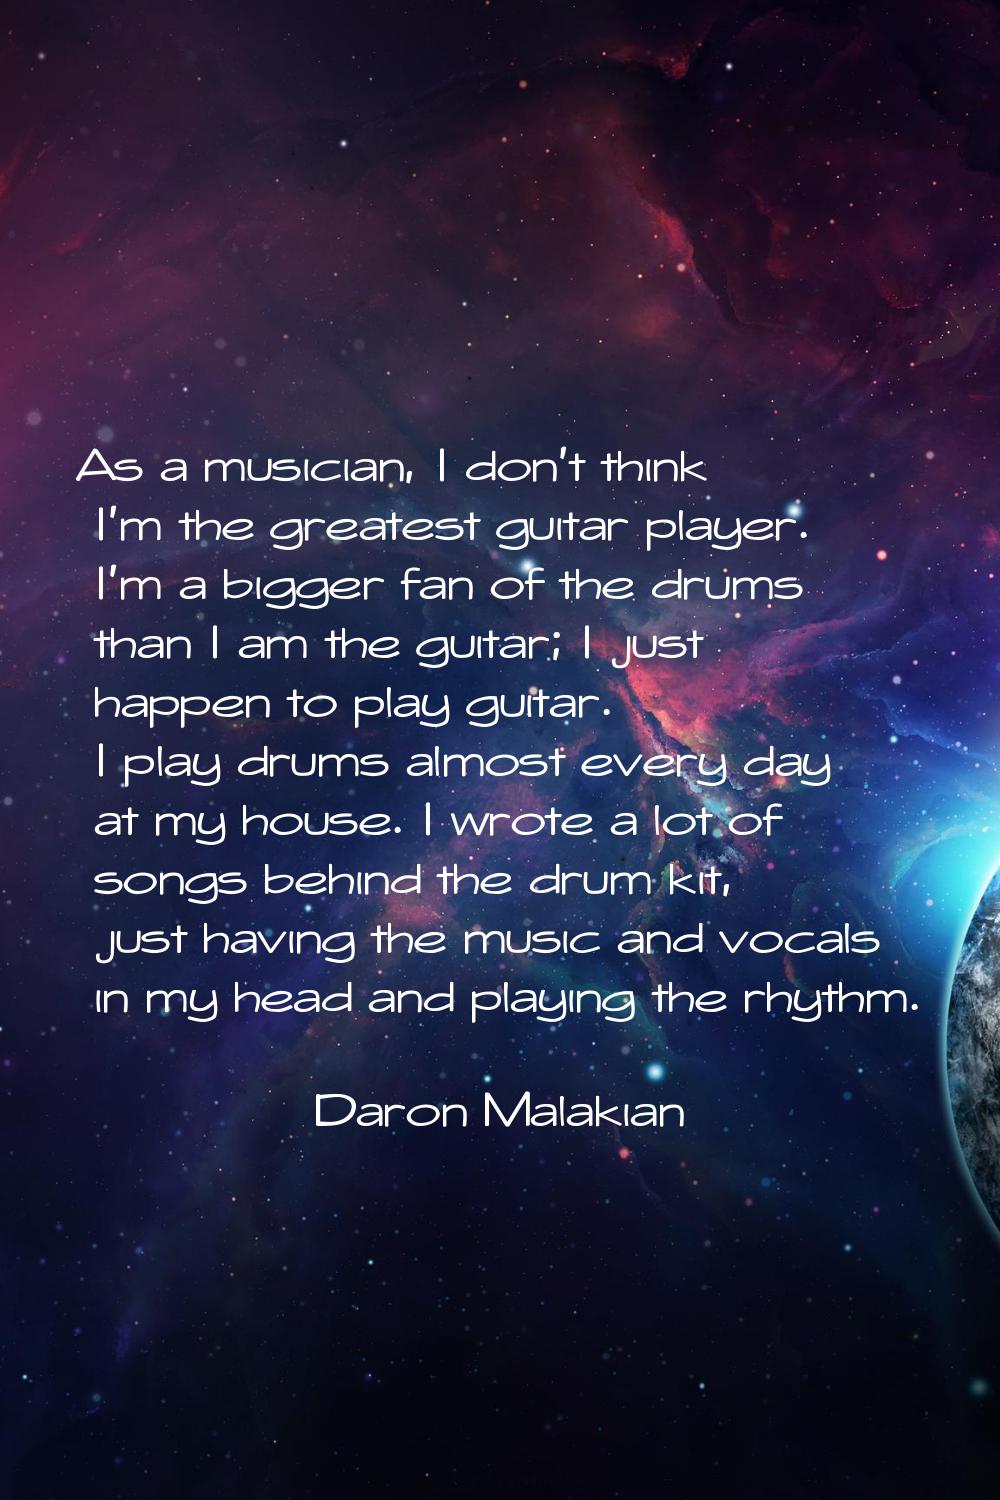 As a musician, I don't think I'm the greatest guitar player. I'm a bigger fan of the drums than I a